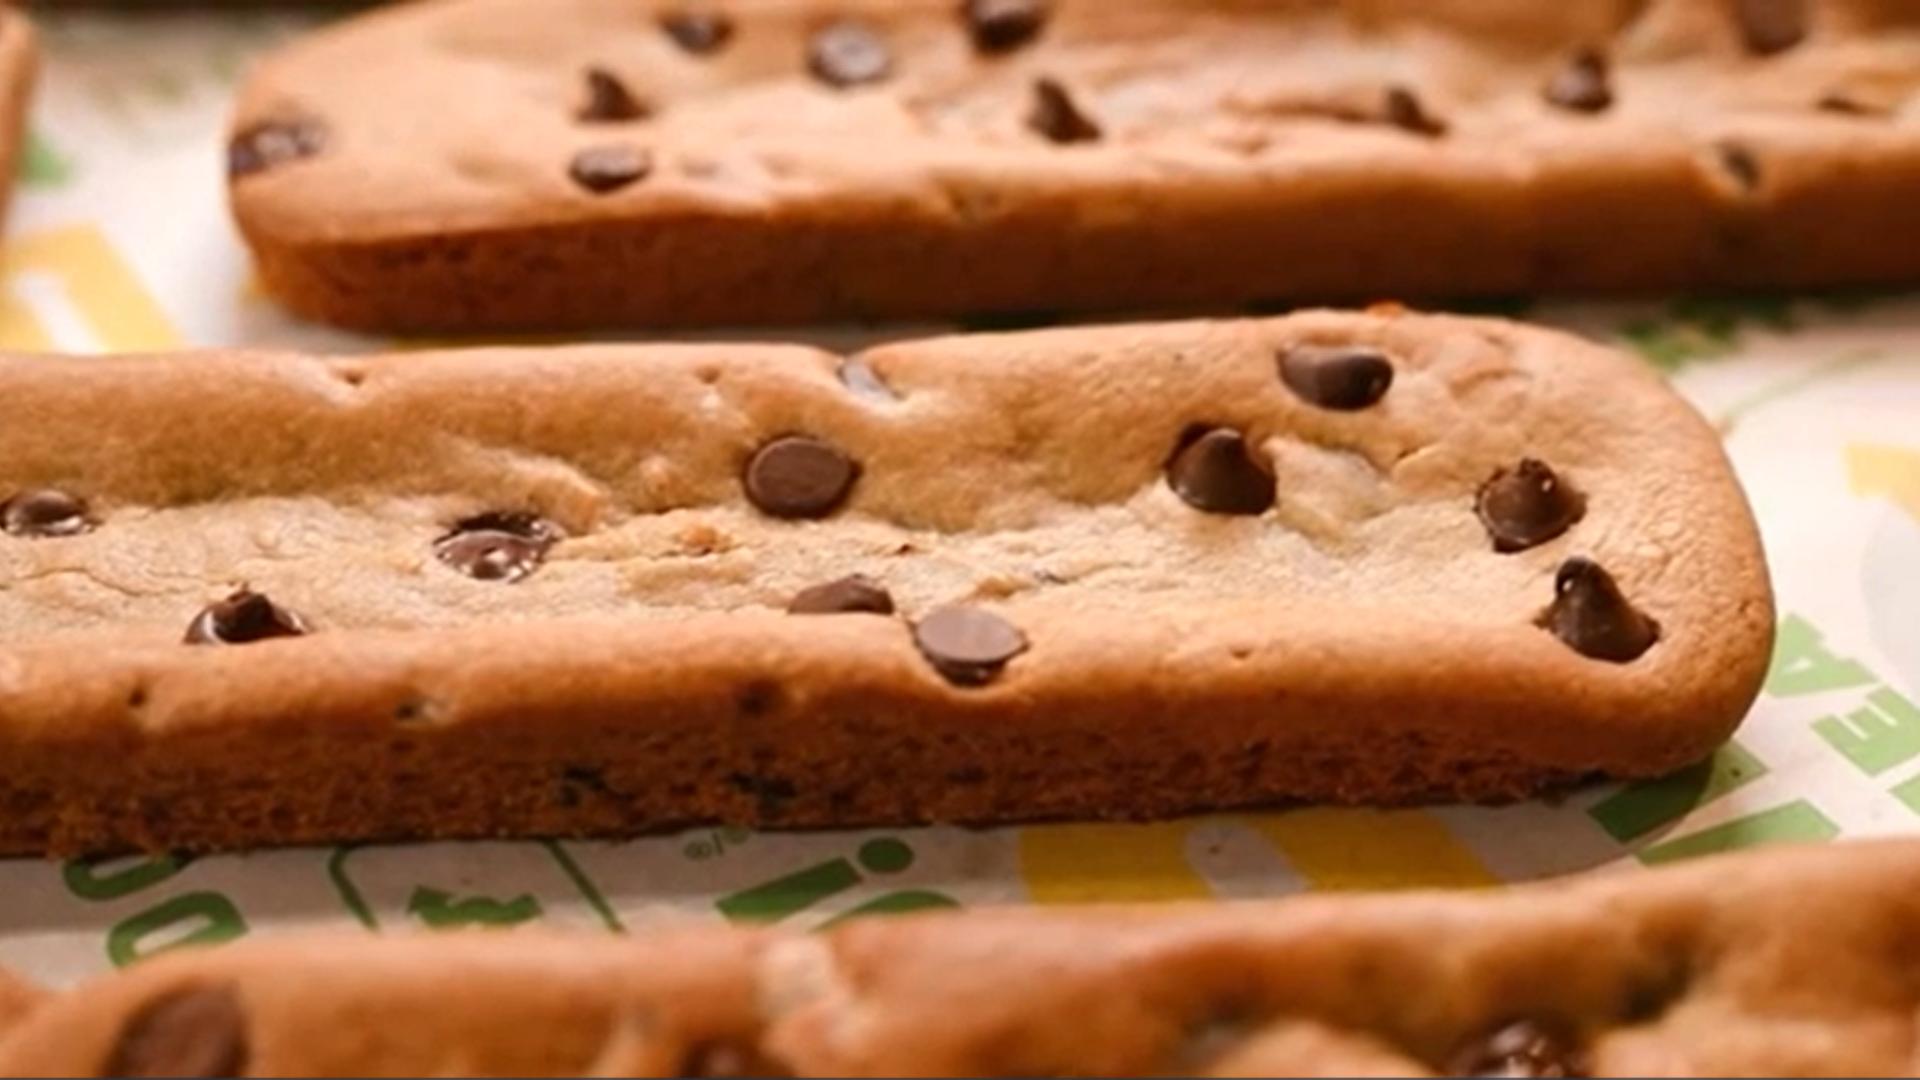 Subway to Sell Footlong Cookies at One Location